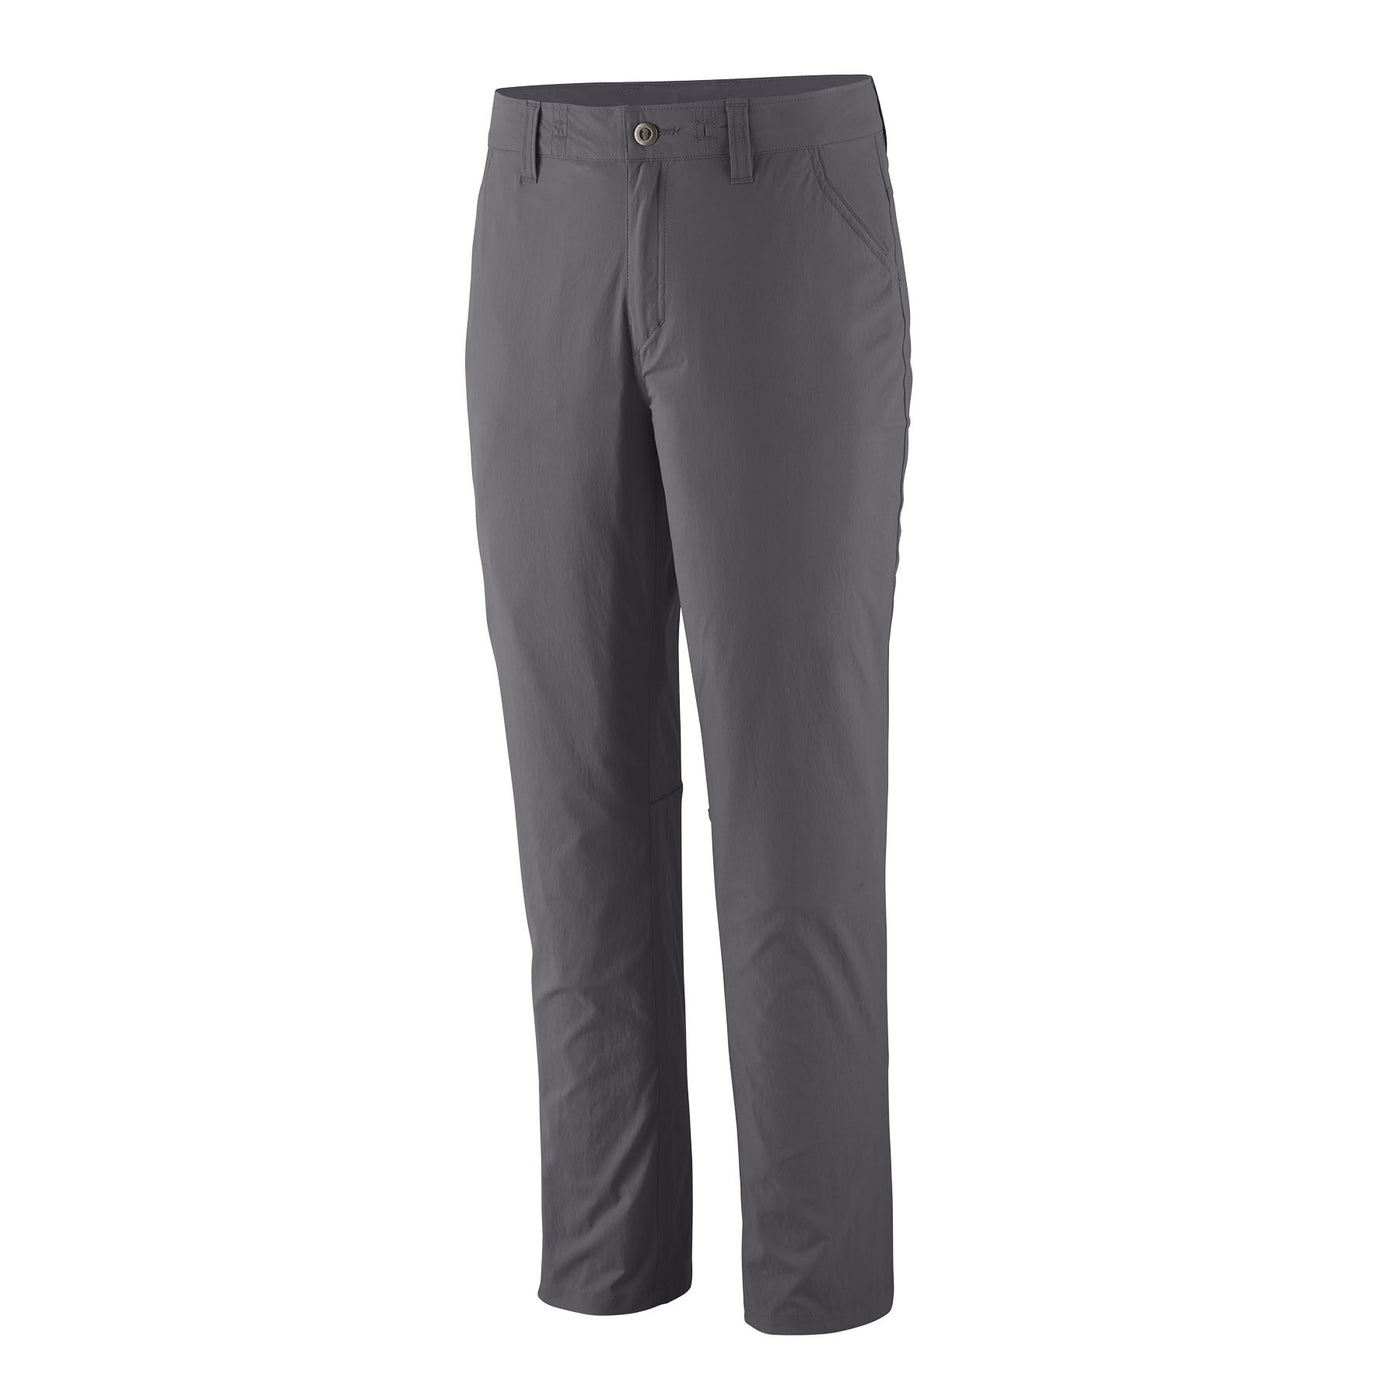 PATAGONIA Women's Quandary Pants 12 / Forge Grey FGE / 30